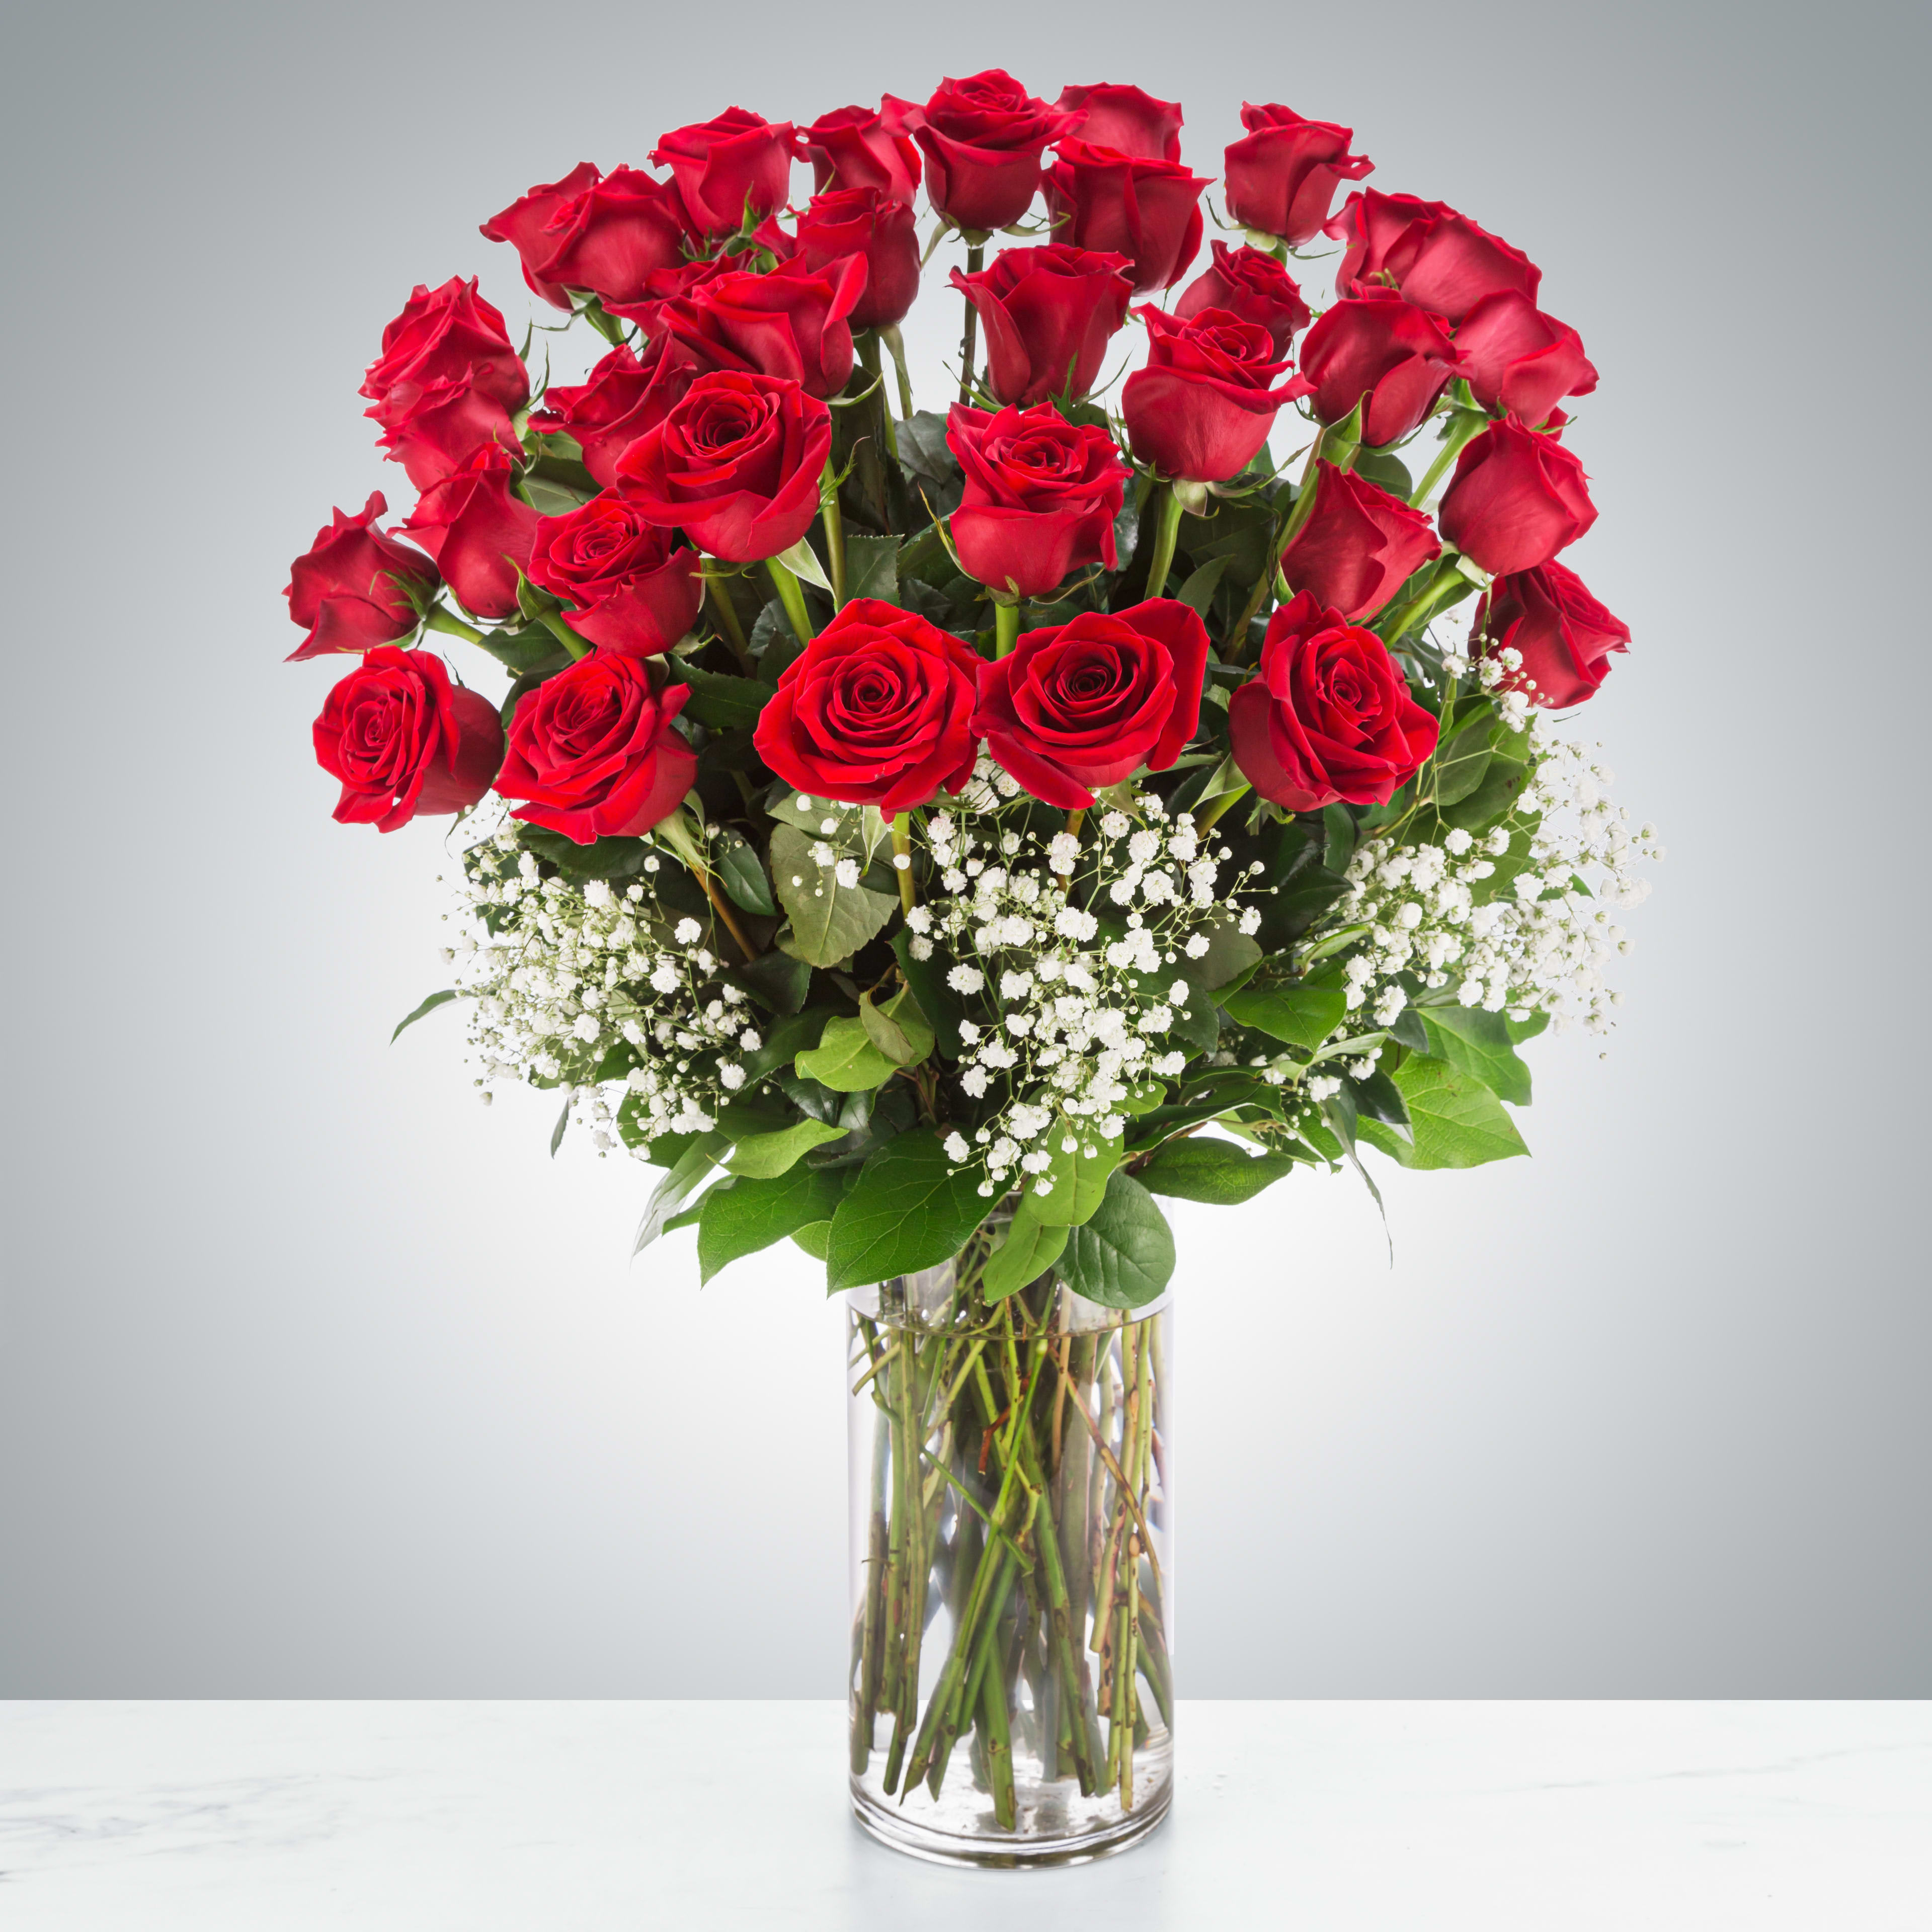 Grandeur Long Stem Rose Arrangement by BloomNation™ - Go big with your love. Send the most extravagant 3 dozen red rose arrangement for Valentine's day, anniversary celebrations, or declarations of love. This luxury arrangement makes a big statement of &quot;I love you&quot; in 36 roses.  Approximate Dimensions: 20&quot;D x 32&quot;H